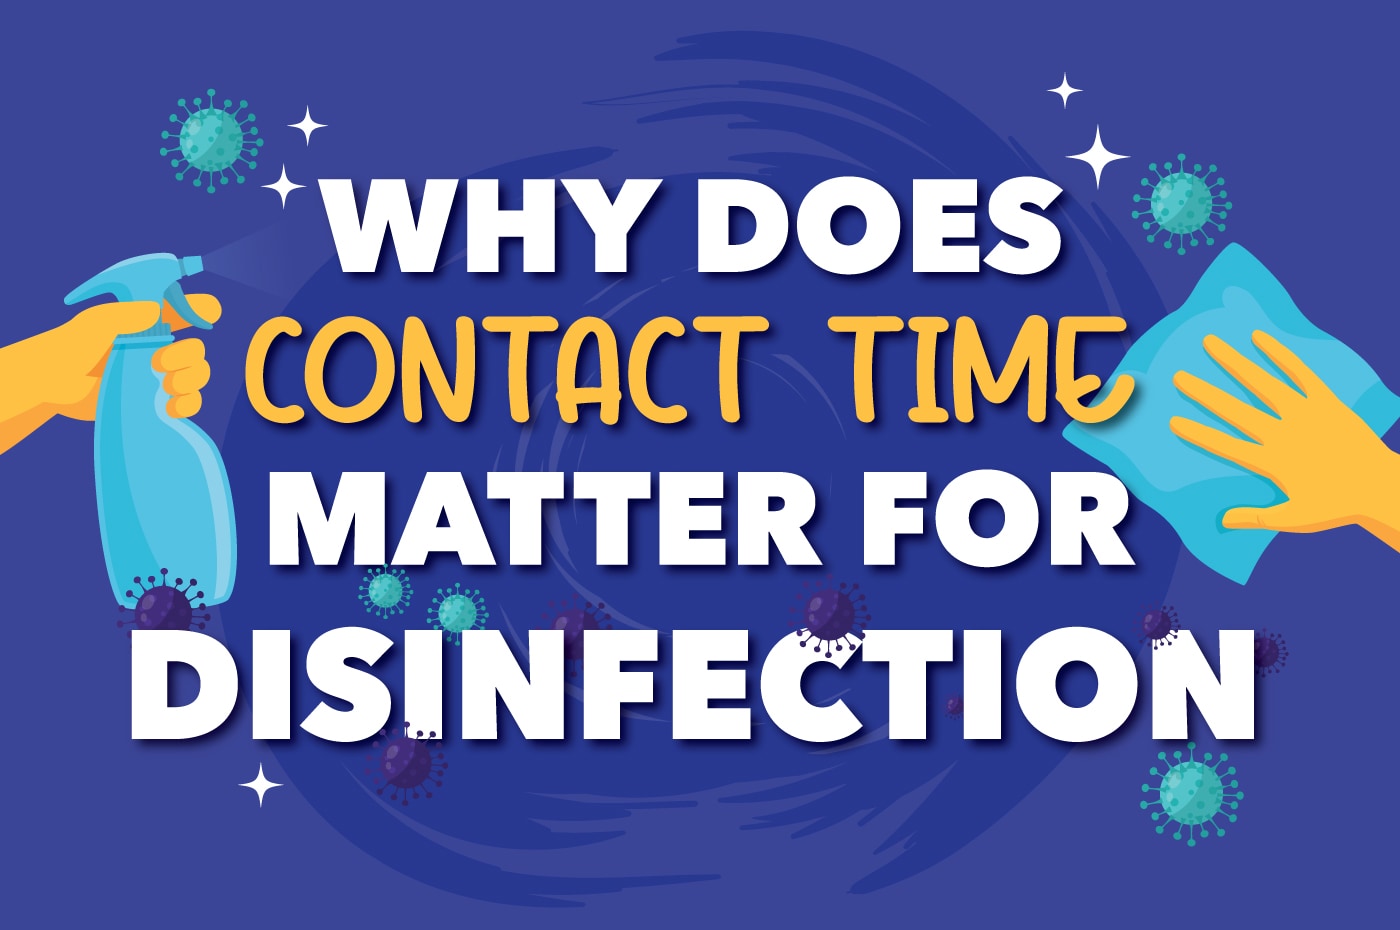 Why Does Contact Time Matter for Disinfection